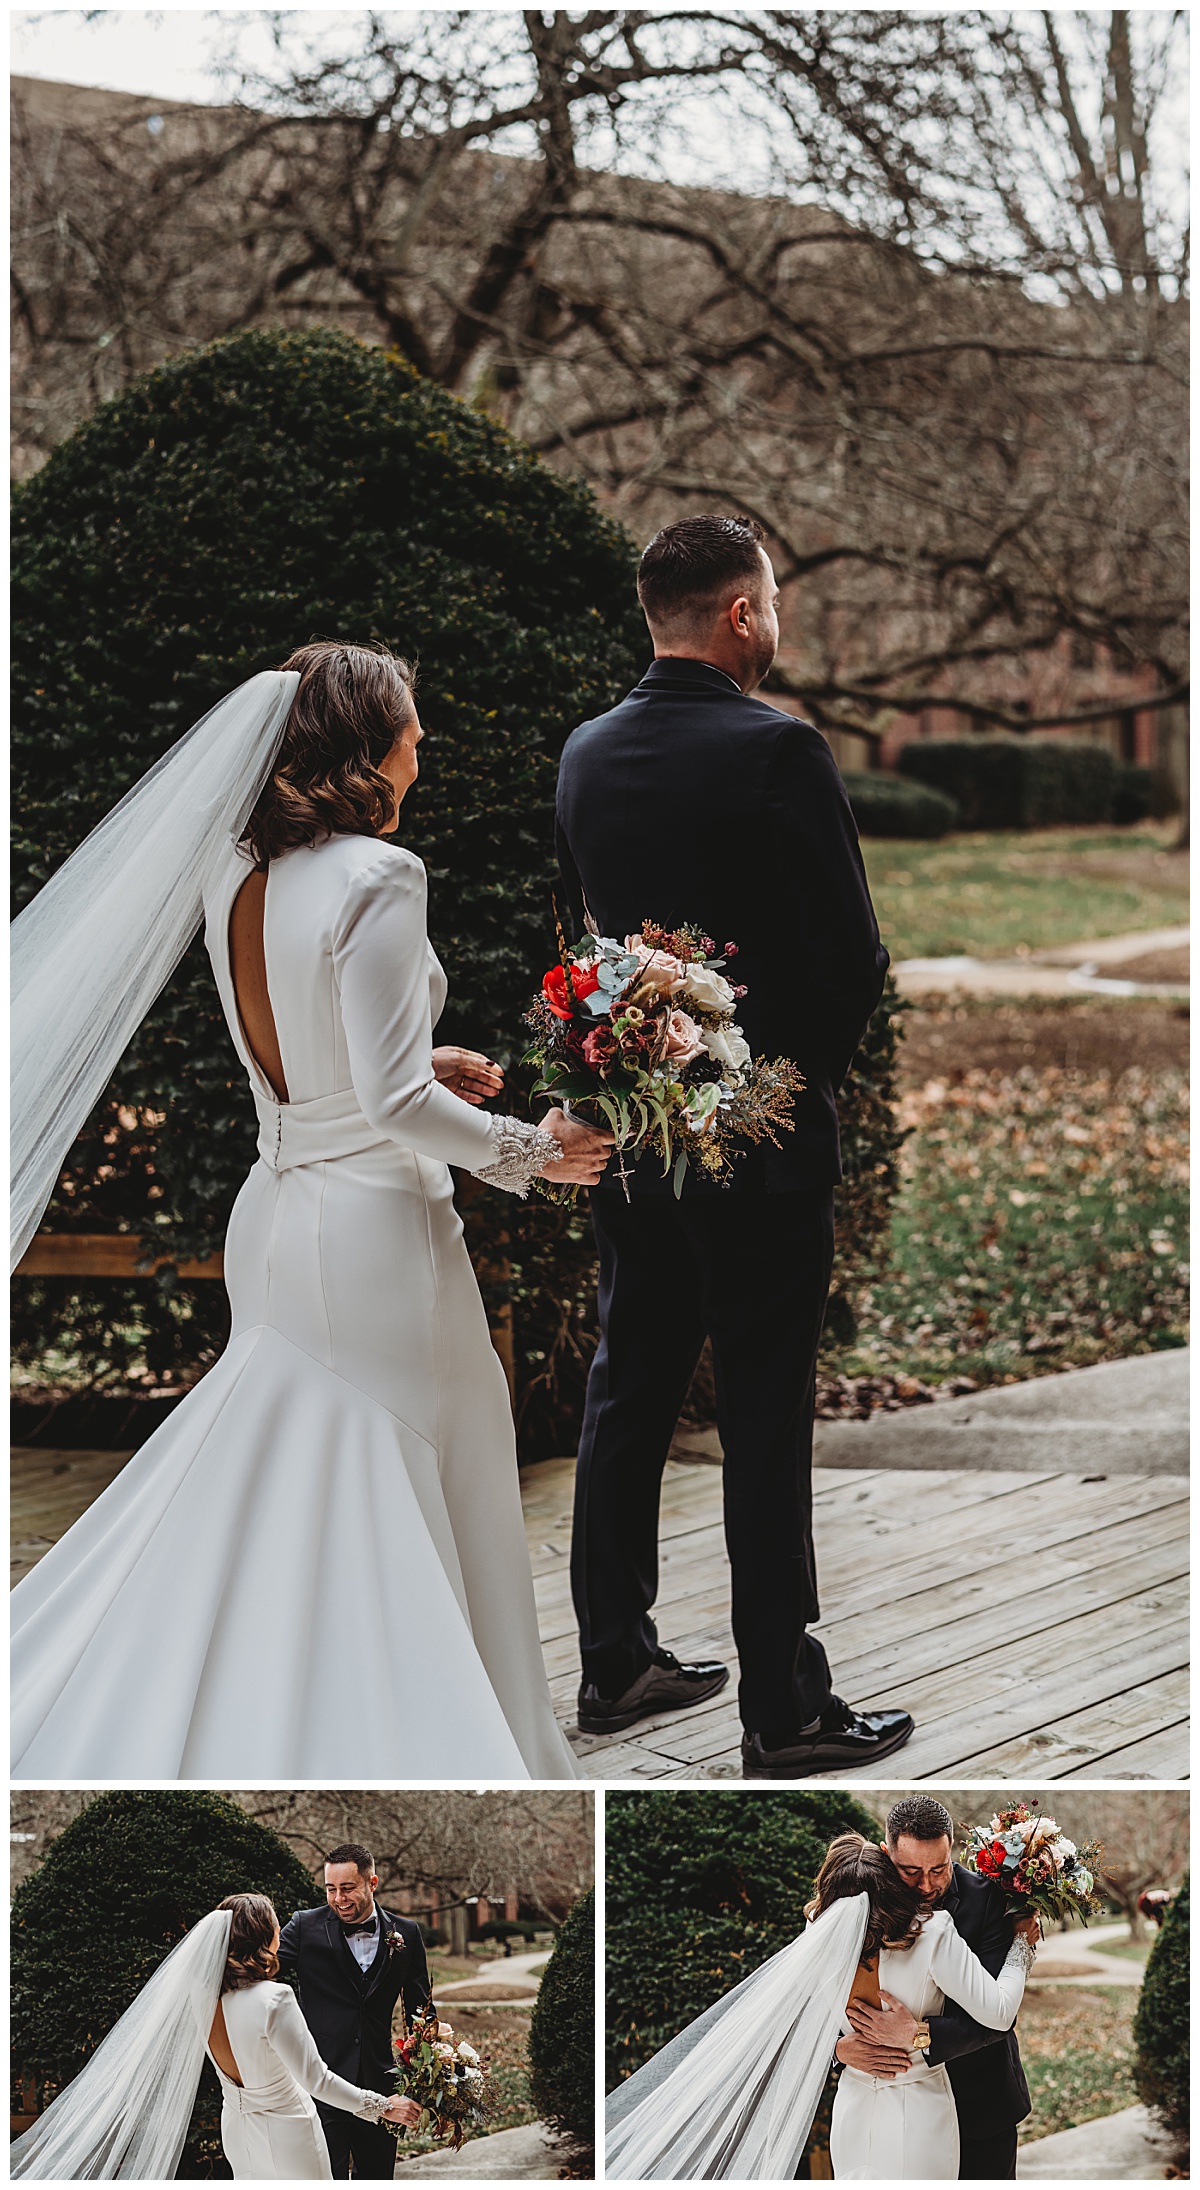 Bride and groom first look pictures for a moody winter wedding in Baltimore by Brittany Dunbar Photography, a Baltimore Wedding Photographer.